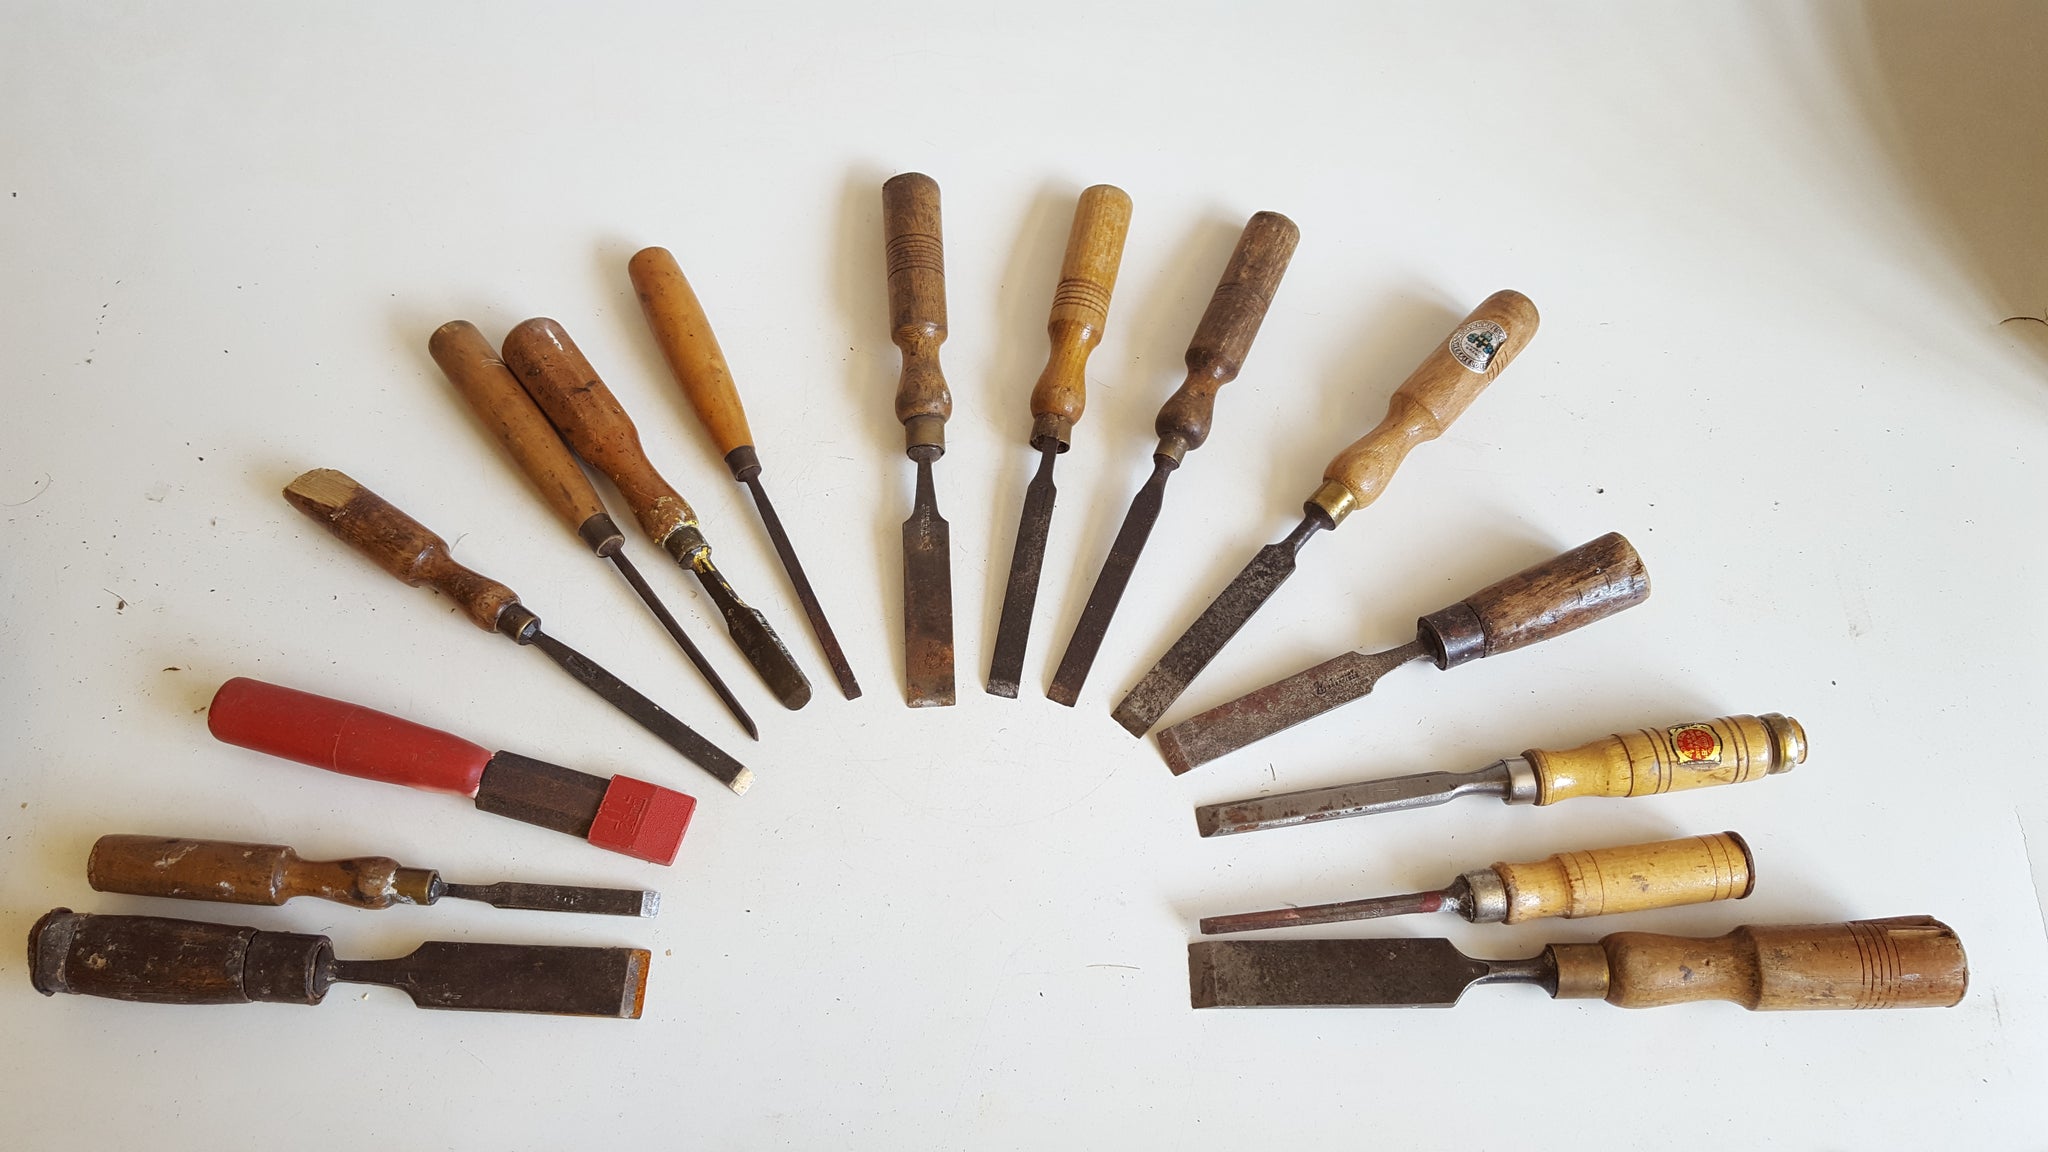 Mixed Lot of 15 Vintage Chisels Sold As Seen 39995